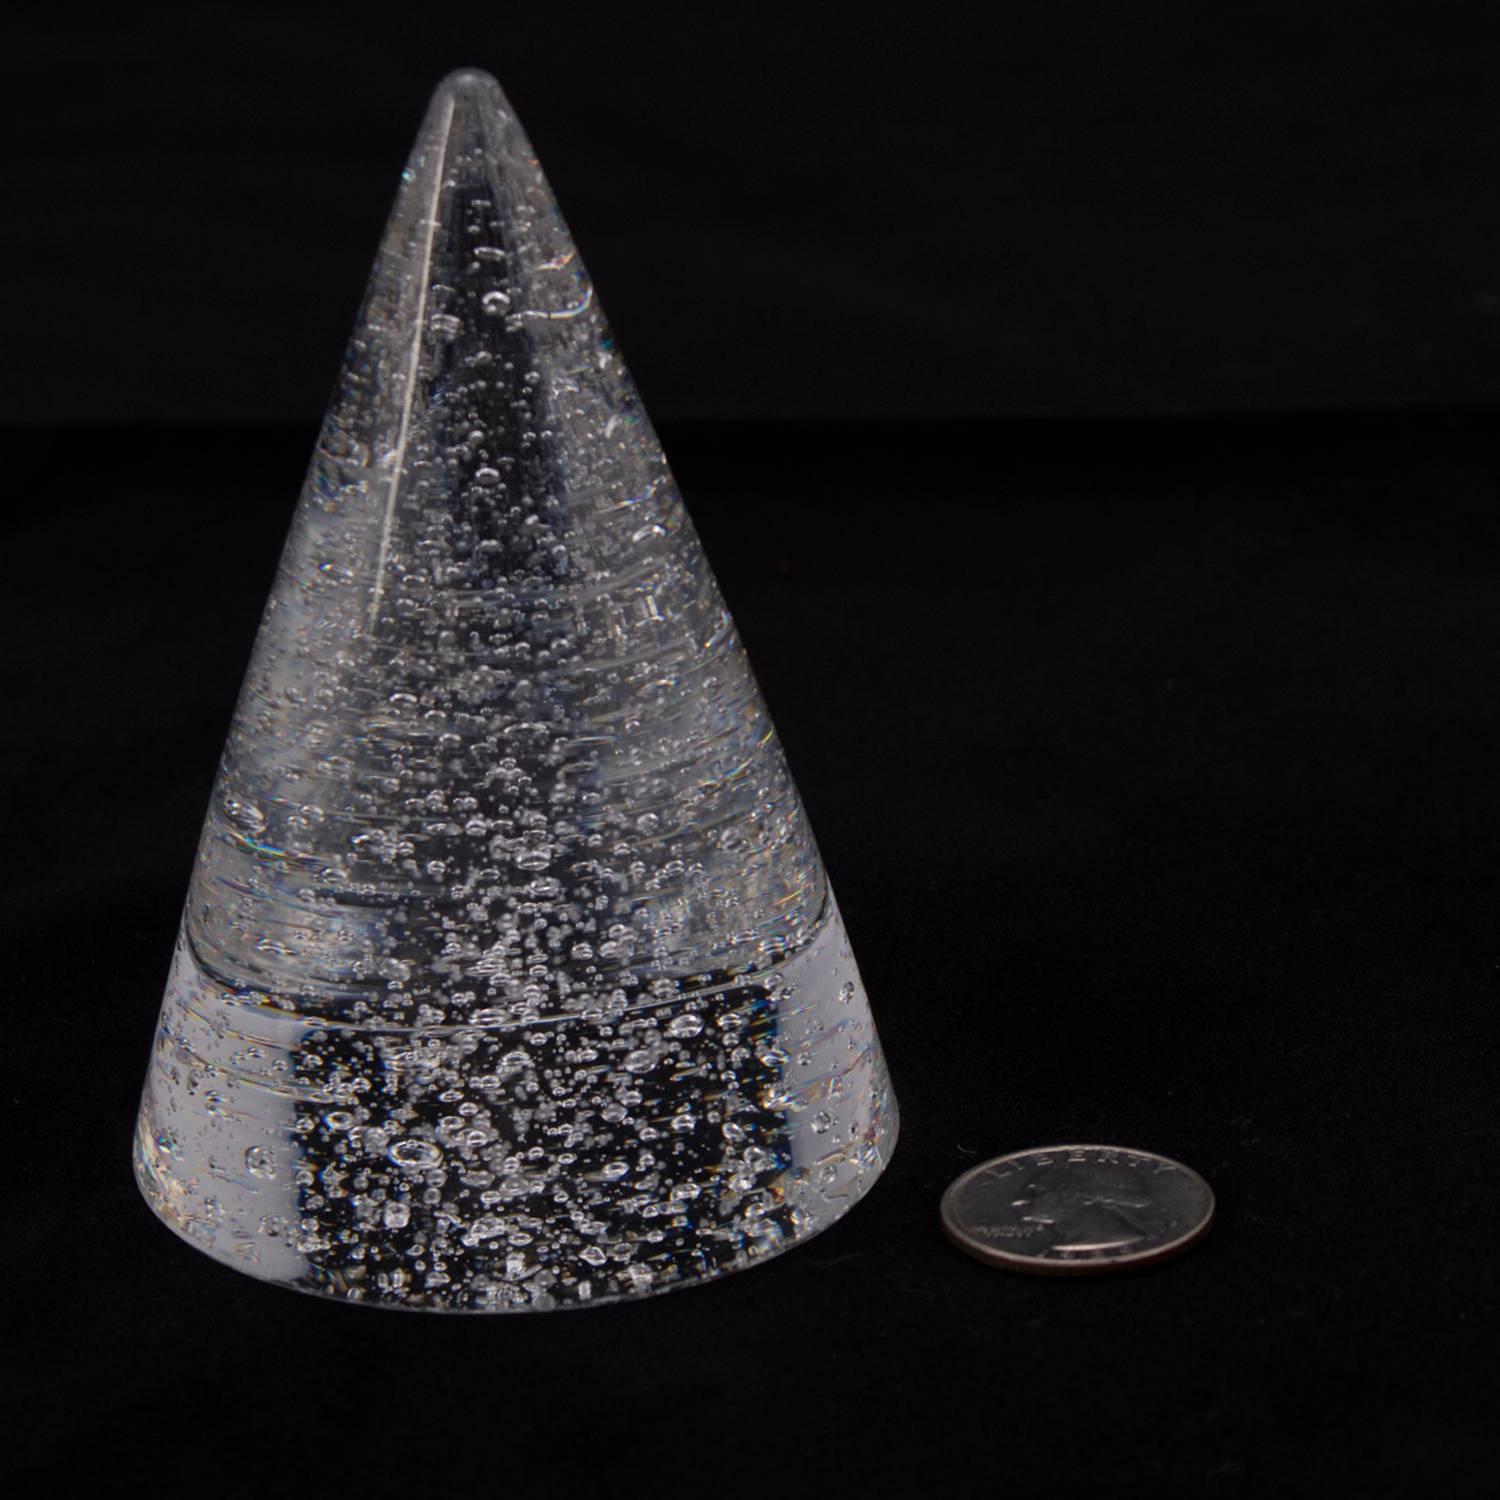 Art glass crystal sculptural paperweight of stylized Christmas Tree by Steuben and designed by David Dowler features conical form and controlled bubbles, paperweight signed on base, 20th century

Measures: 4.5